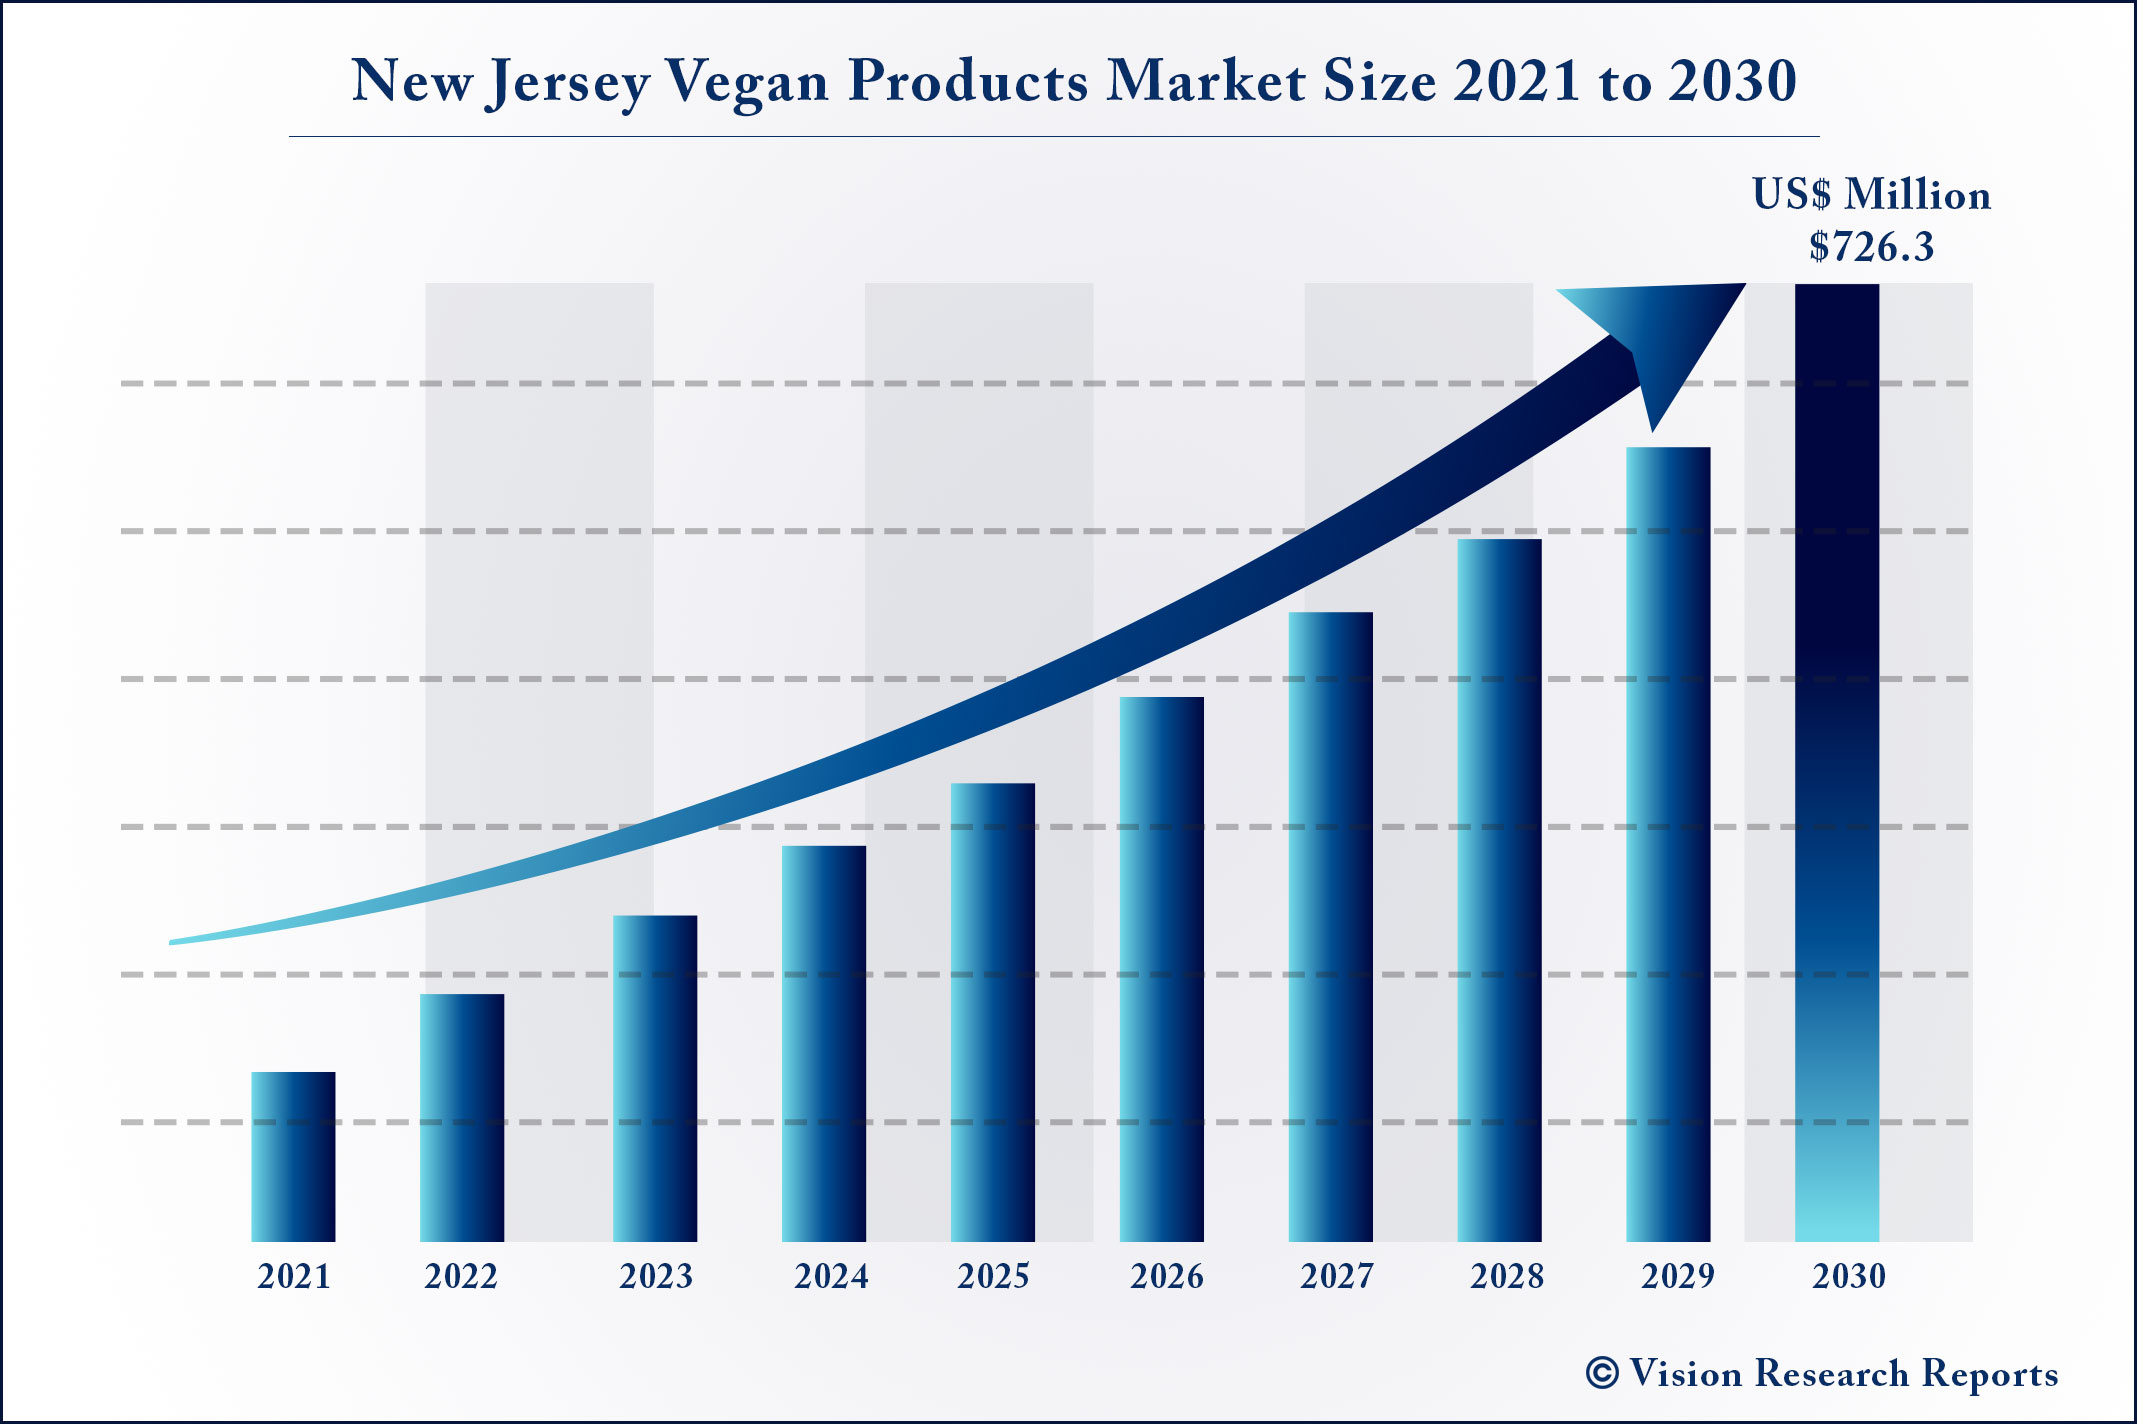 New Jersey Vegan Products Market Size 2021 to 2030